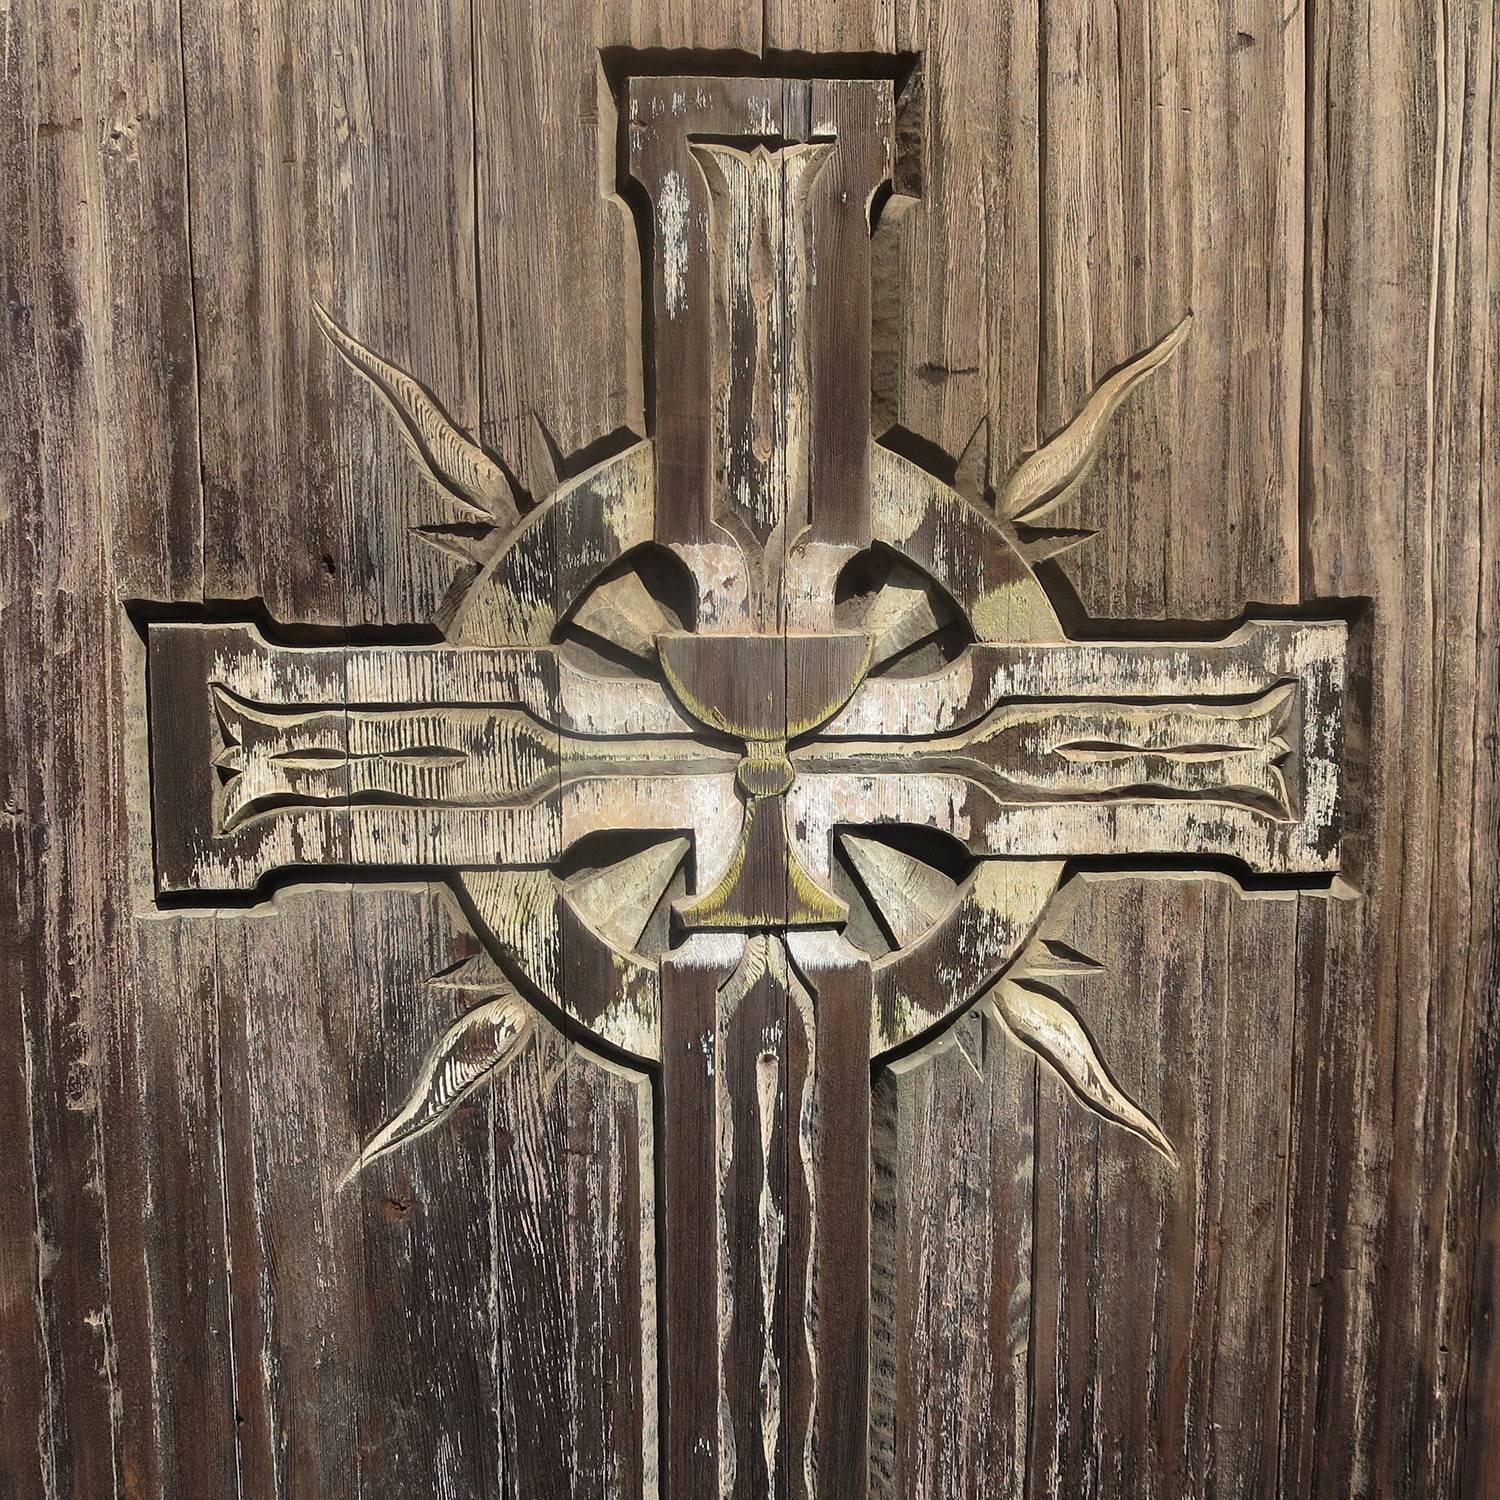 RETIREMENT SALE!!!  EVERYTHING MUST GO - CHECK OUT OUR OTHER ITEMS.

This fantastic free standing wooden panel fits into its' original stepped wooden base, or could be removed and repurposed into a door. The surface is carved with a large crucifix,